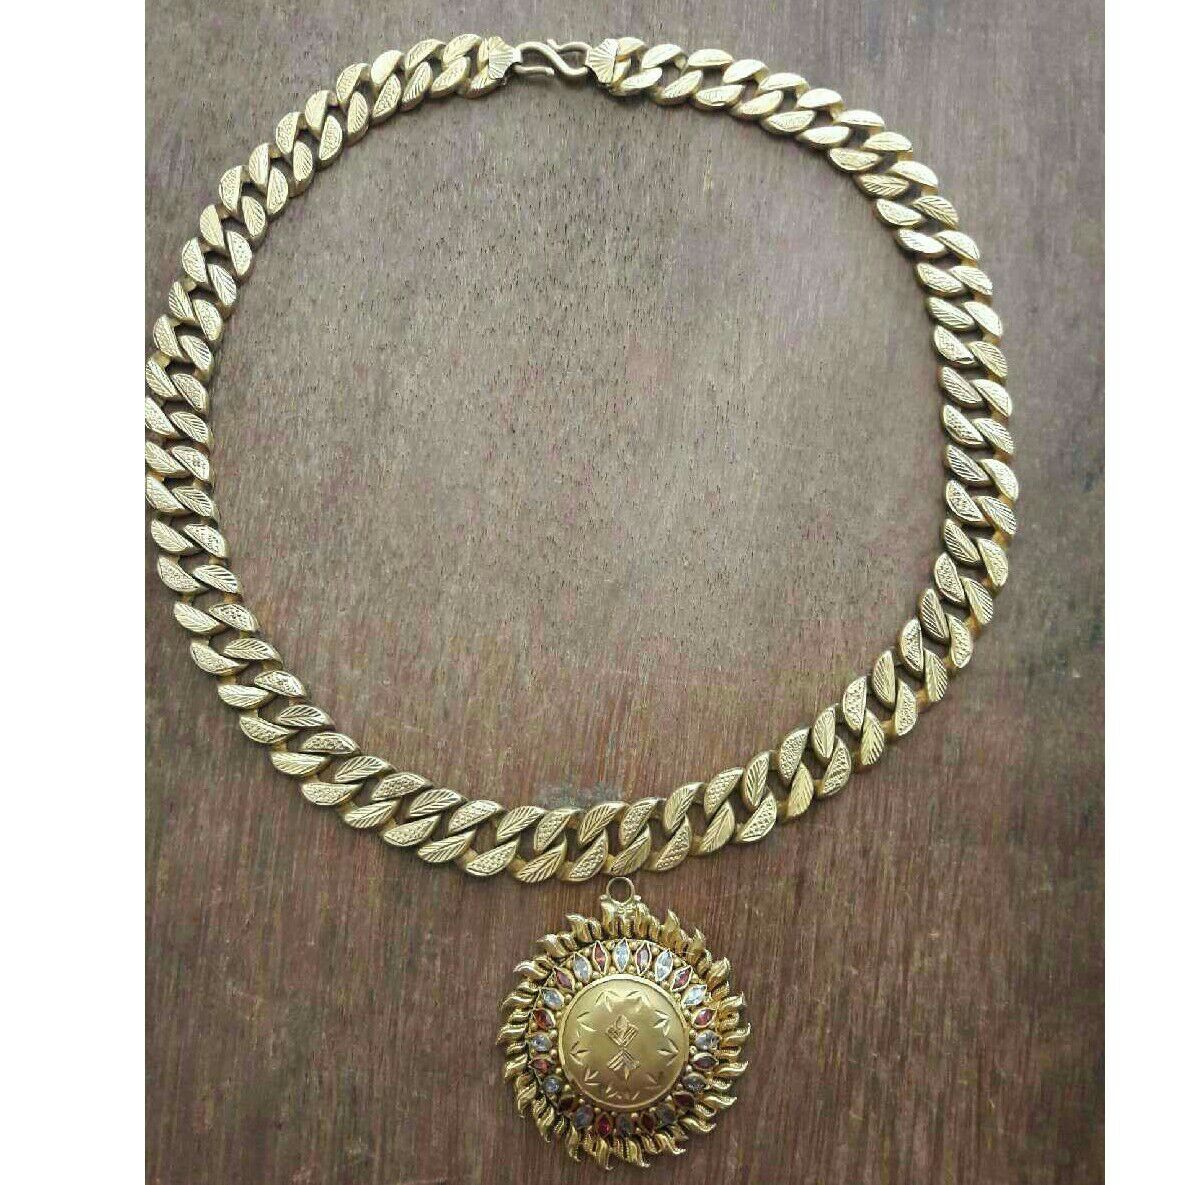 22K / 916 Gold Gents Sun Shaped Attractive Chain